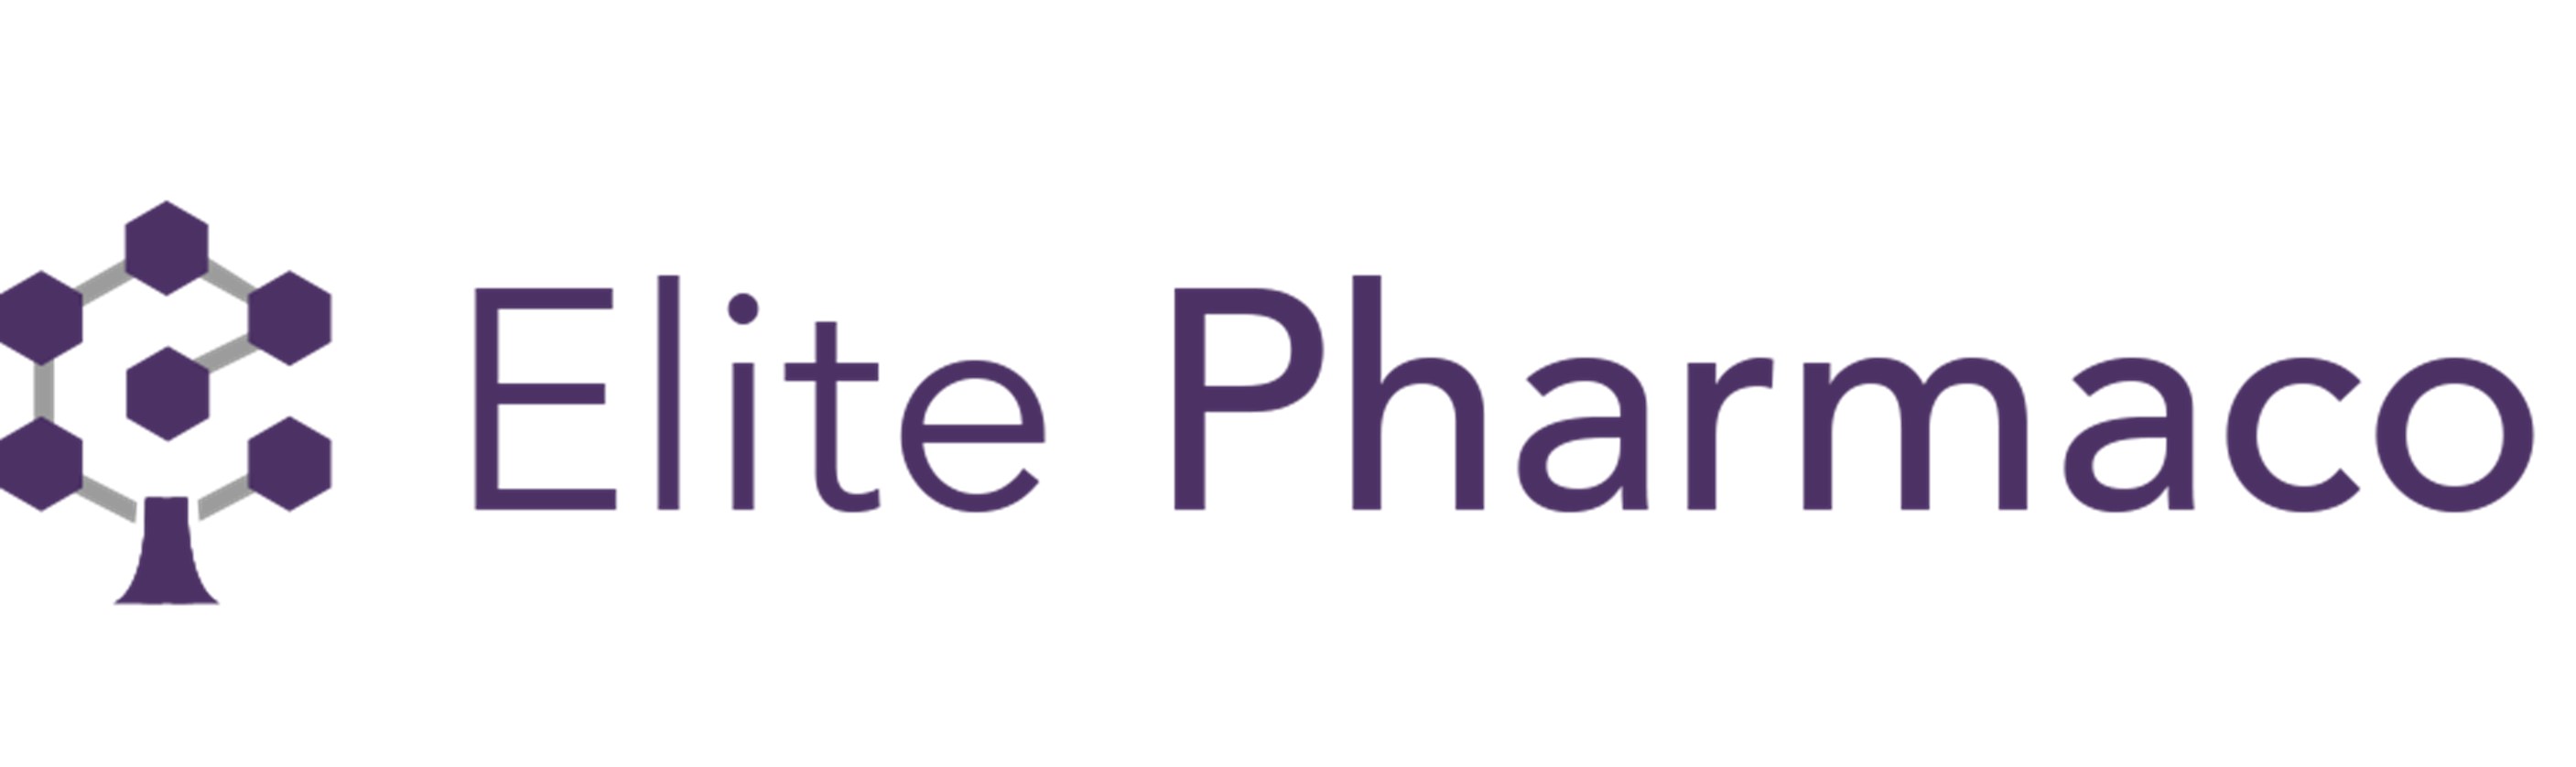 Elite Pharmaco Launches in London and is set to transform the Medical Cannabis Market.